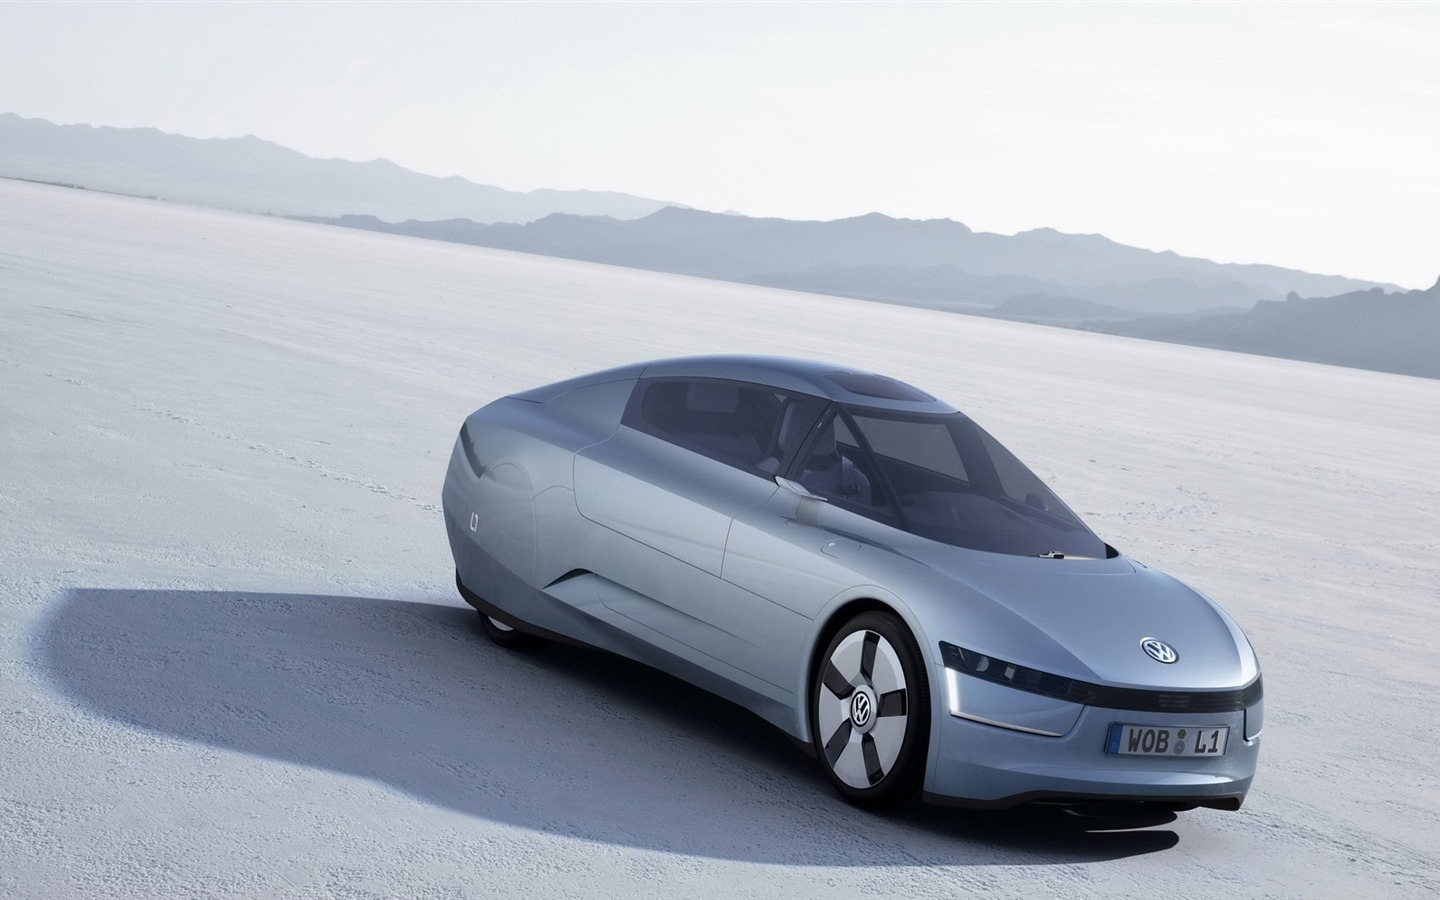 Volkswagen L1 Tapety Concept Car #7 - 1440x900